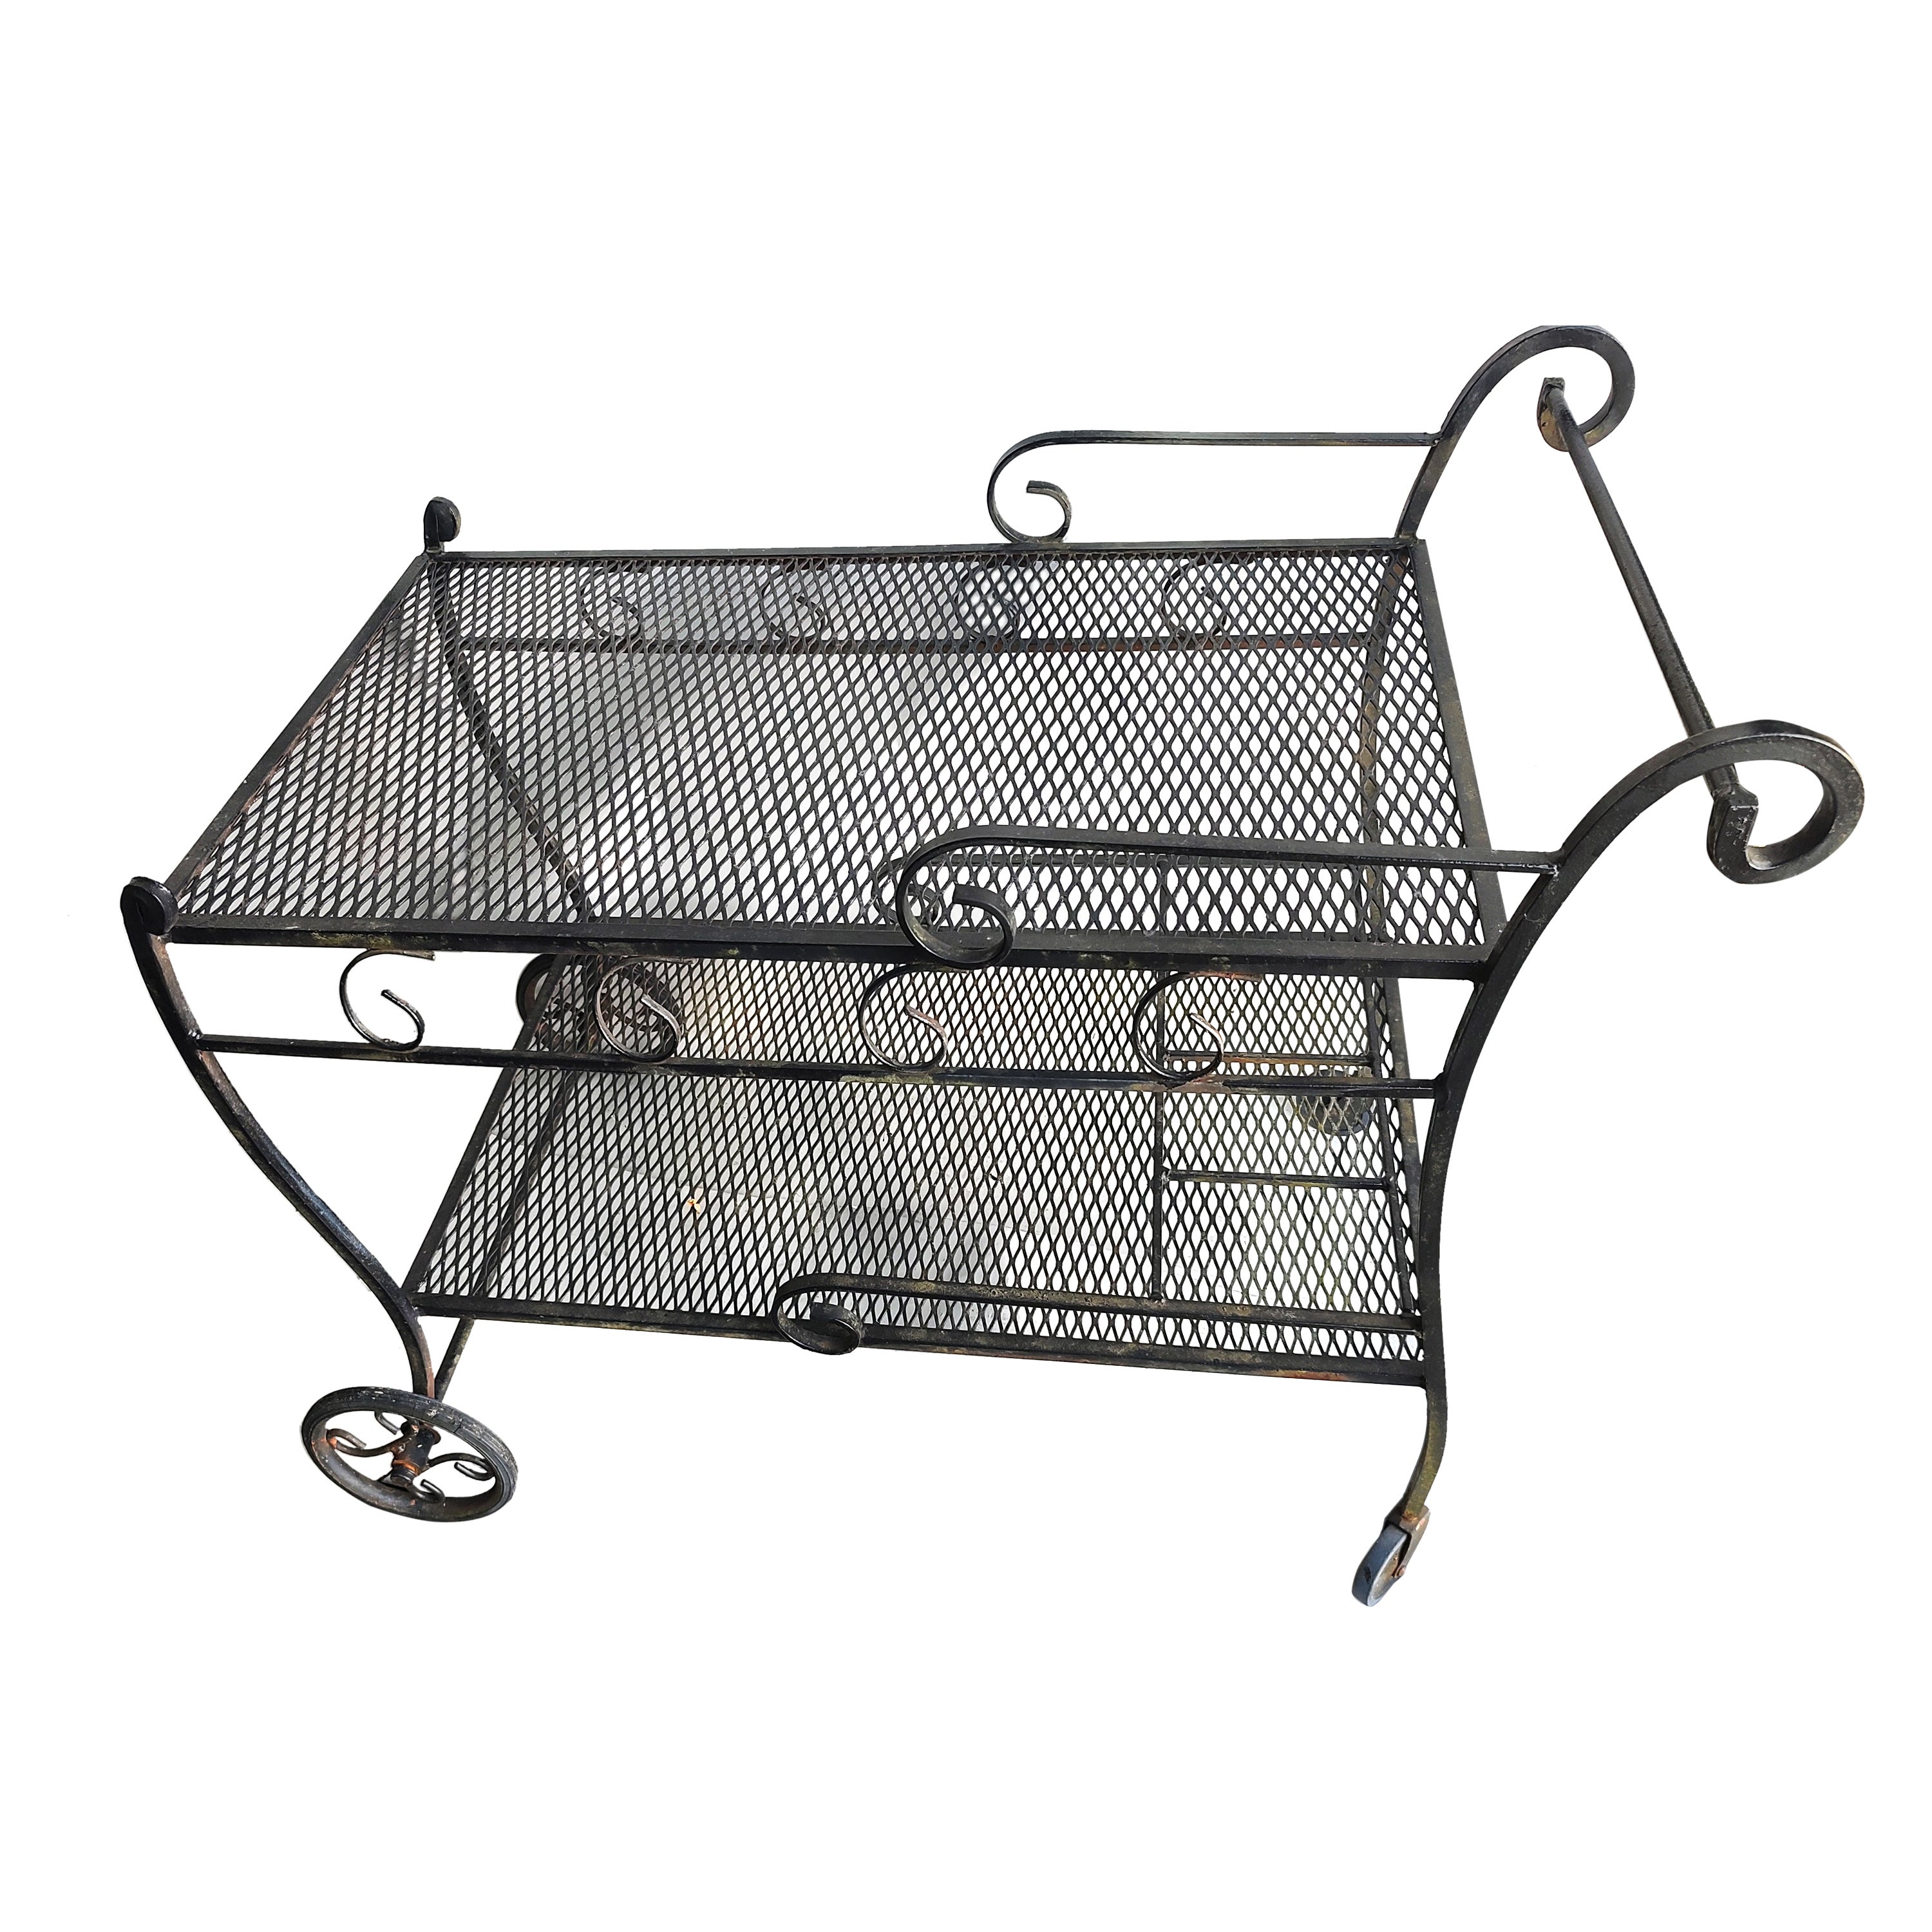 Hand-Crafted Mid-Century Modern Wrought Iron Outdoor Bar Cart with Liquor Bottle Holder For Sale